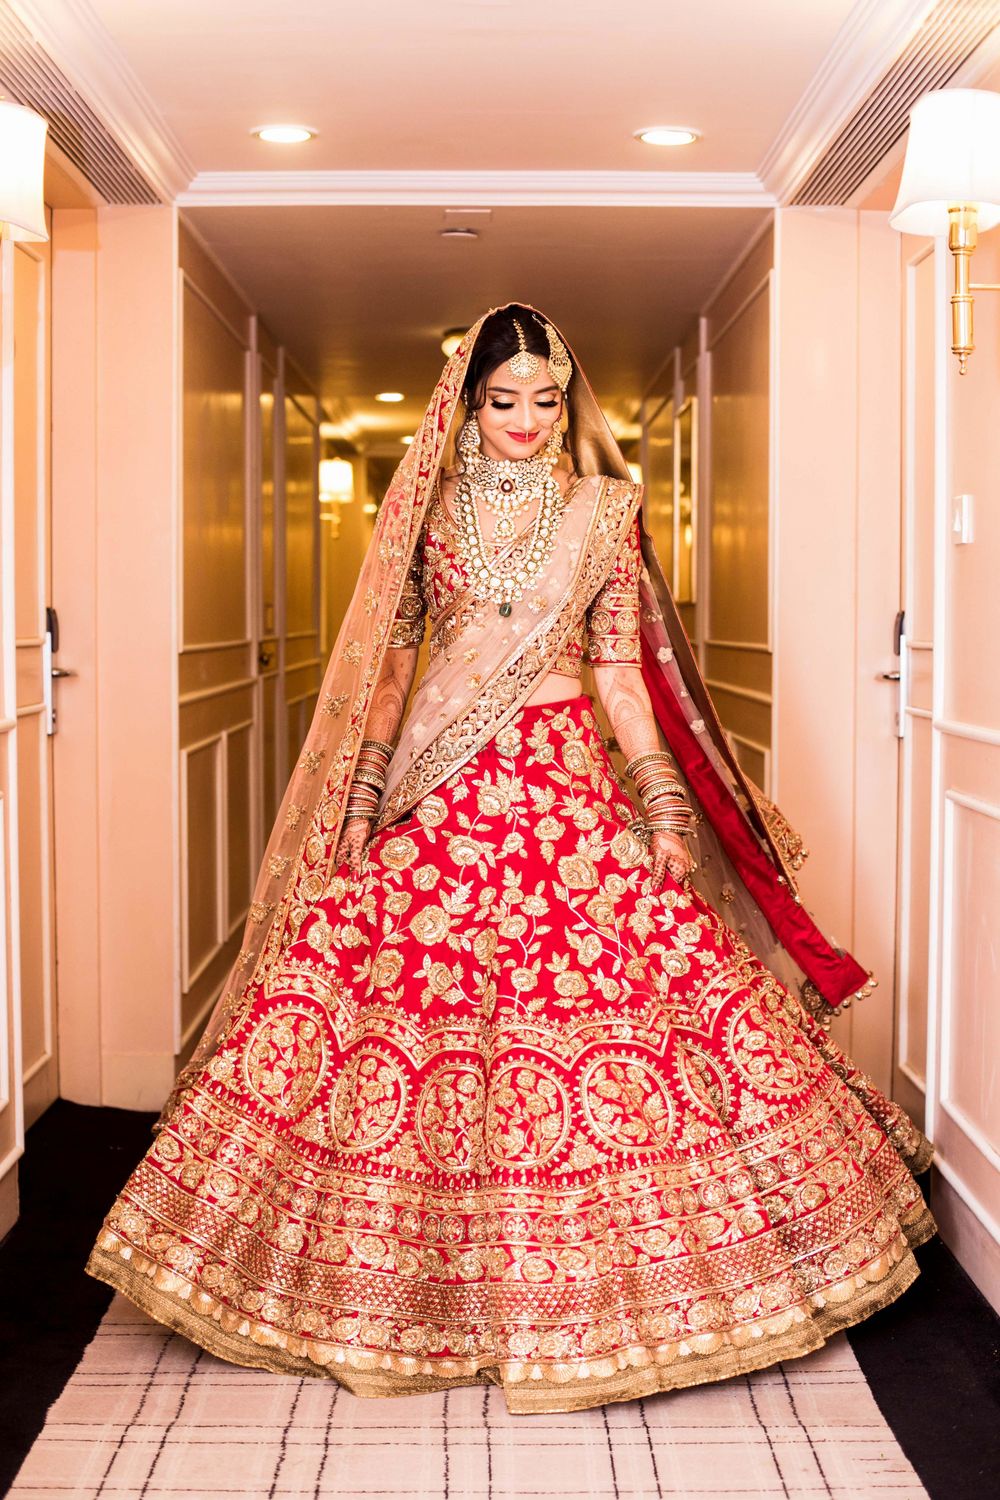 Photo of Bride showing off red and gold bridal lehenga